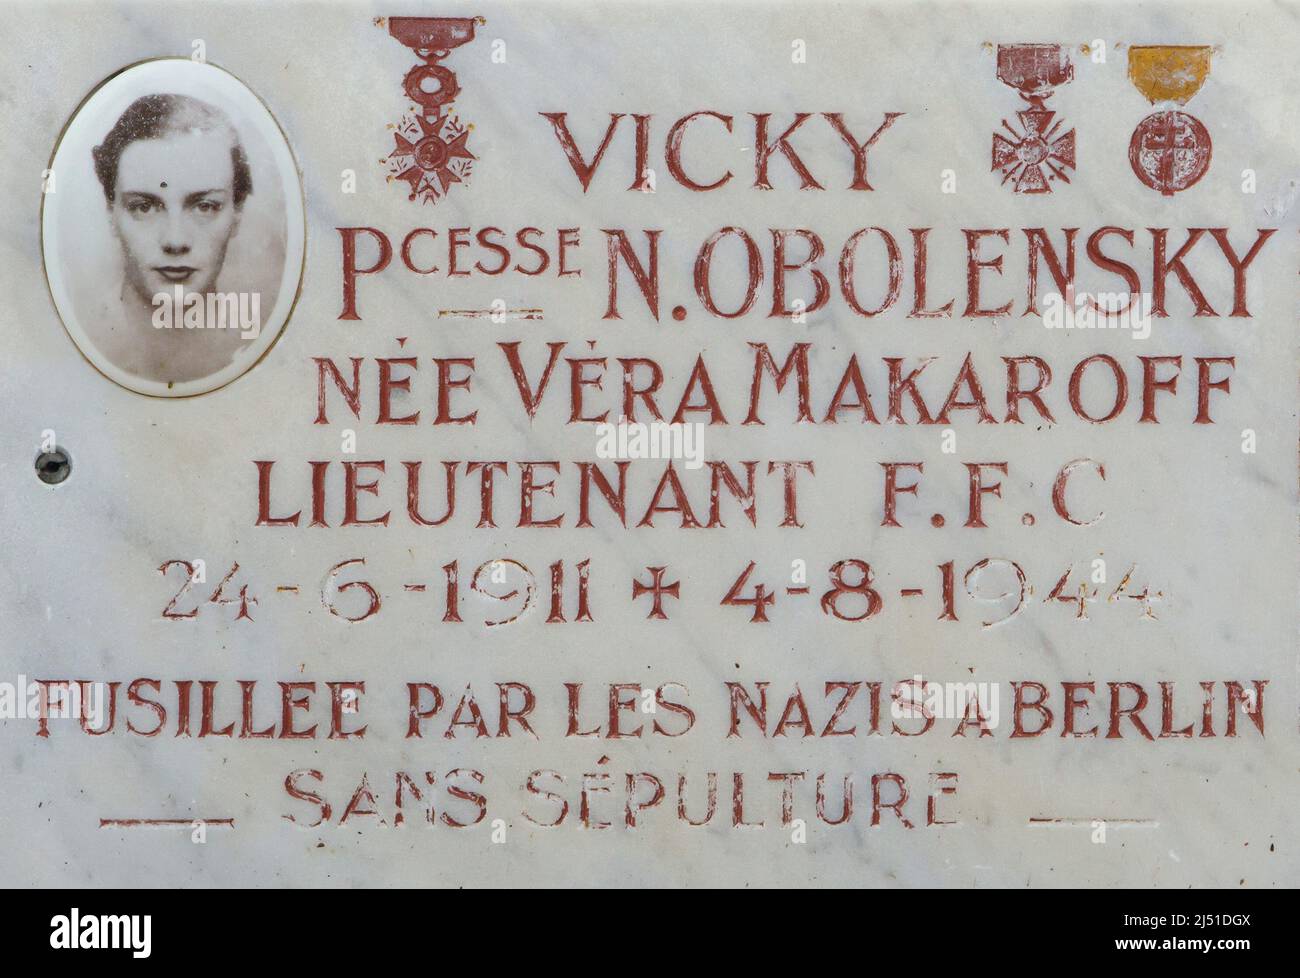 Commemorative plaque devoted to Russian princess Véra Obolensky (1911-1944) also known as Vicky Obolensky in the Memorial chapel devoted to Russian white emigrants who attended the French Resistance during the Second World War at the Russian Cemetery in Sainte-Geneviève-des-Bois (Cimetière russe de Sainte-Geneviève-des-Bois) near Paris, France. Stock Photo